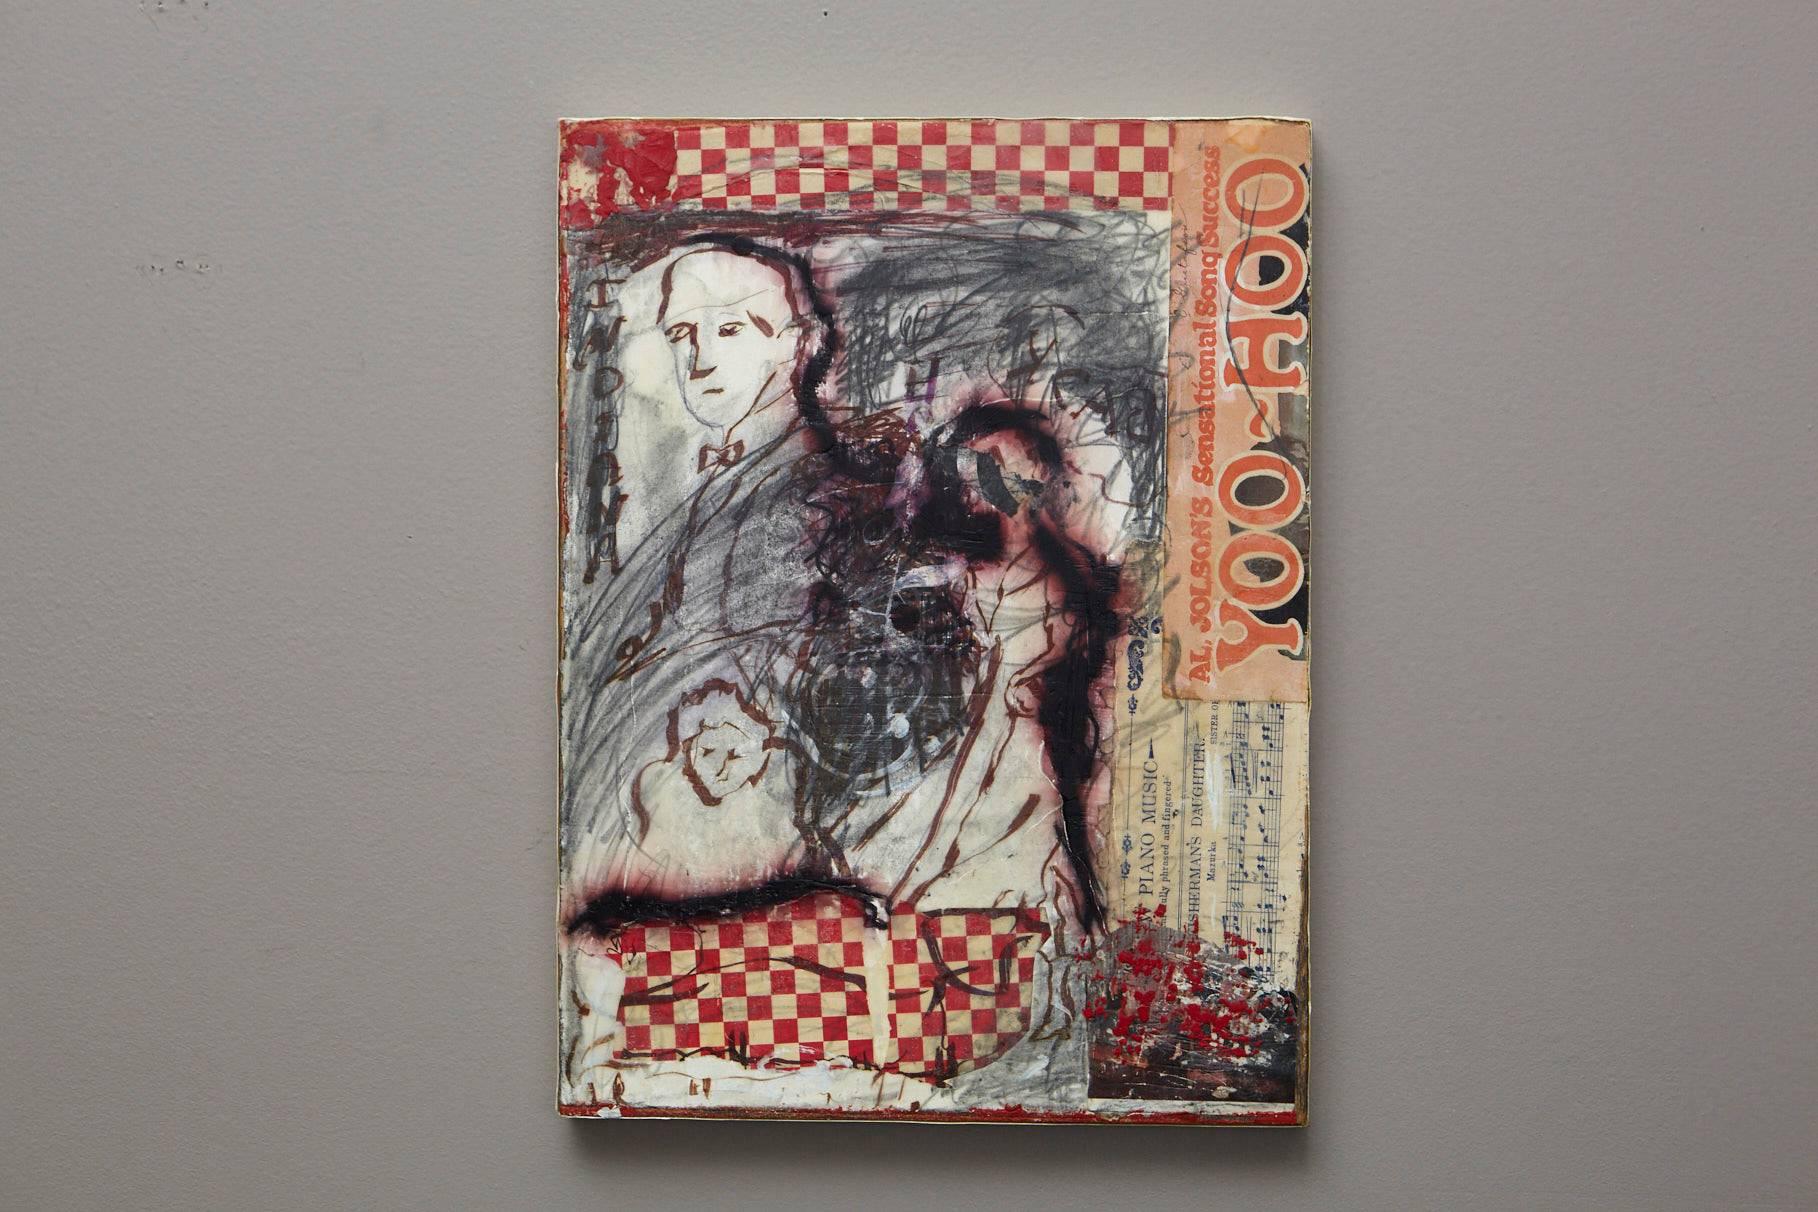 Mixed Media. Collage on wood board, ink, crayon, found objects, encaustic. Unsigned, sticker on back with title, year and name.

Riva Leviten (American 1928-2014) was born in Hollywood, California and spent most of her life active in the dynamic art